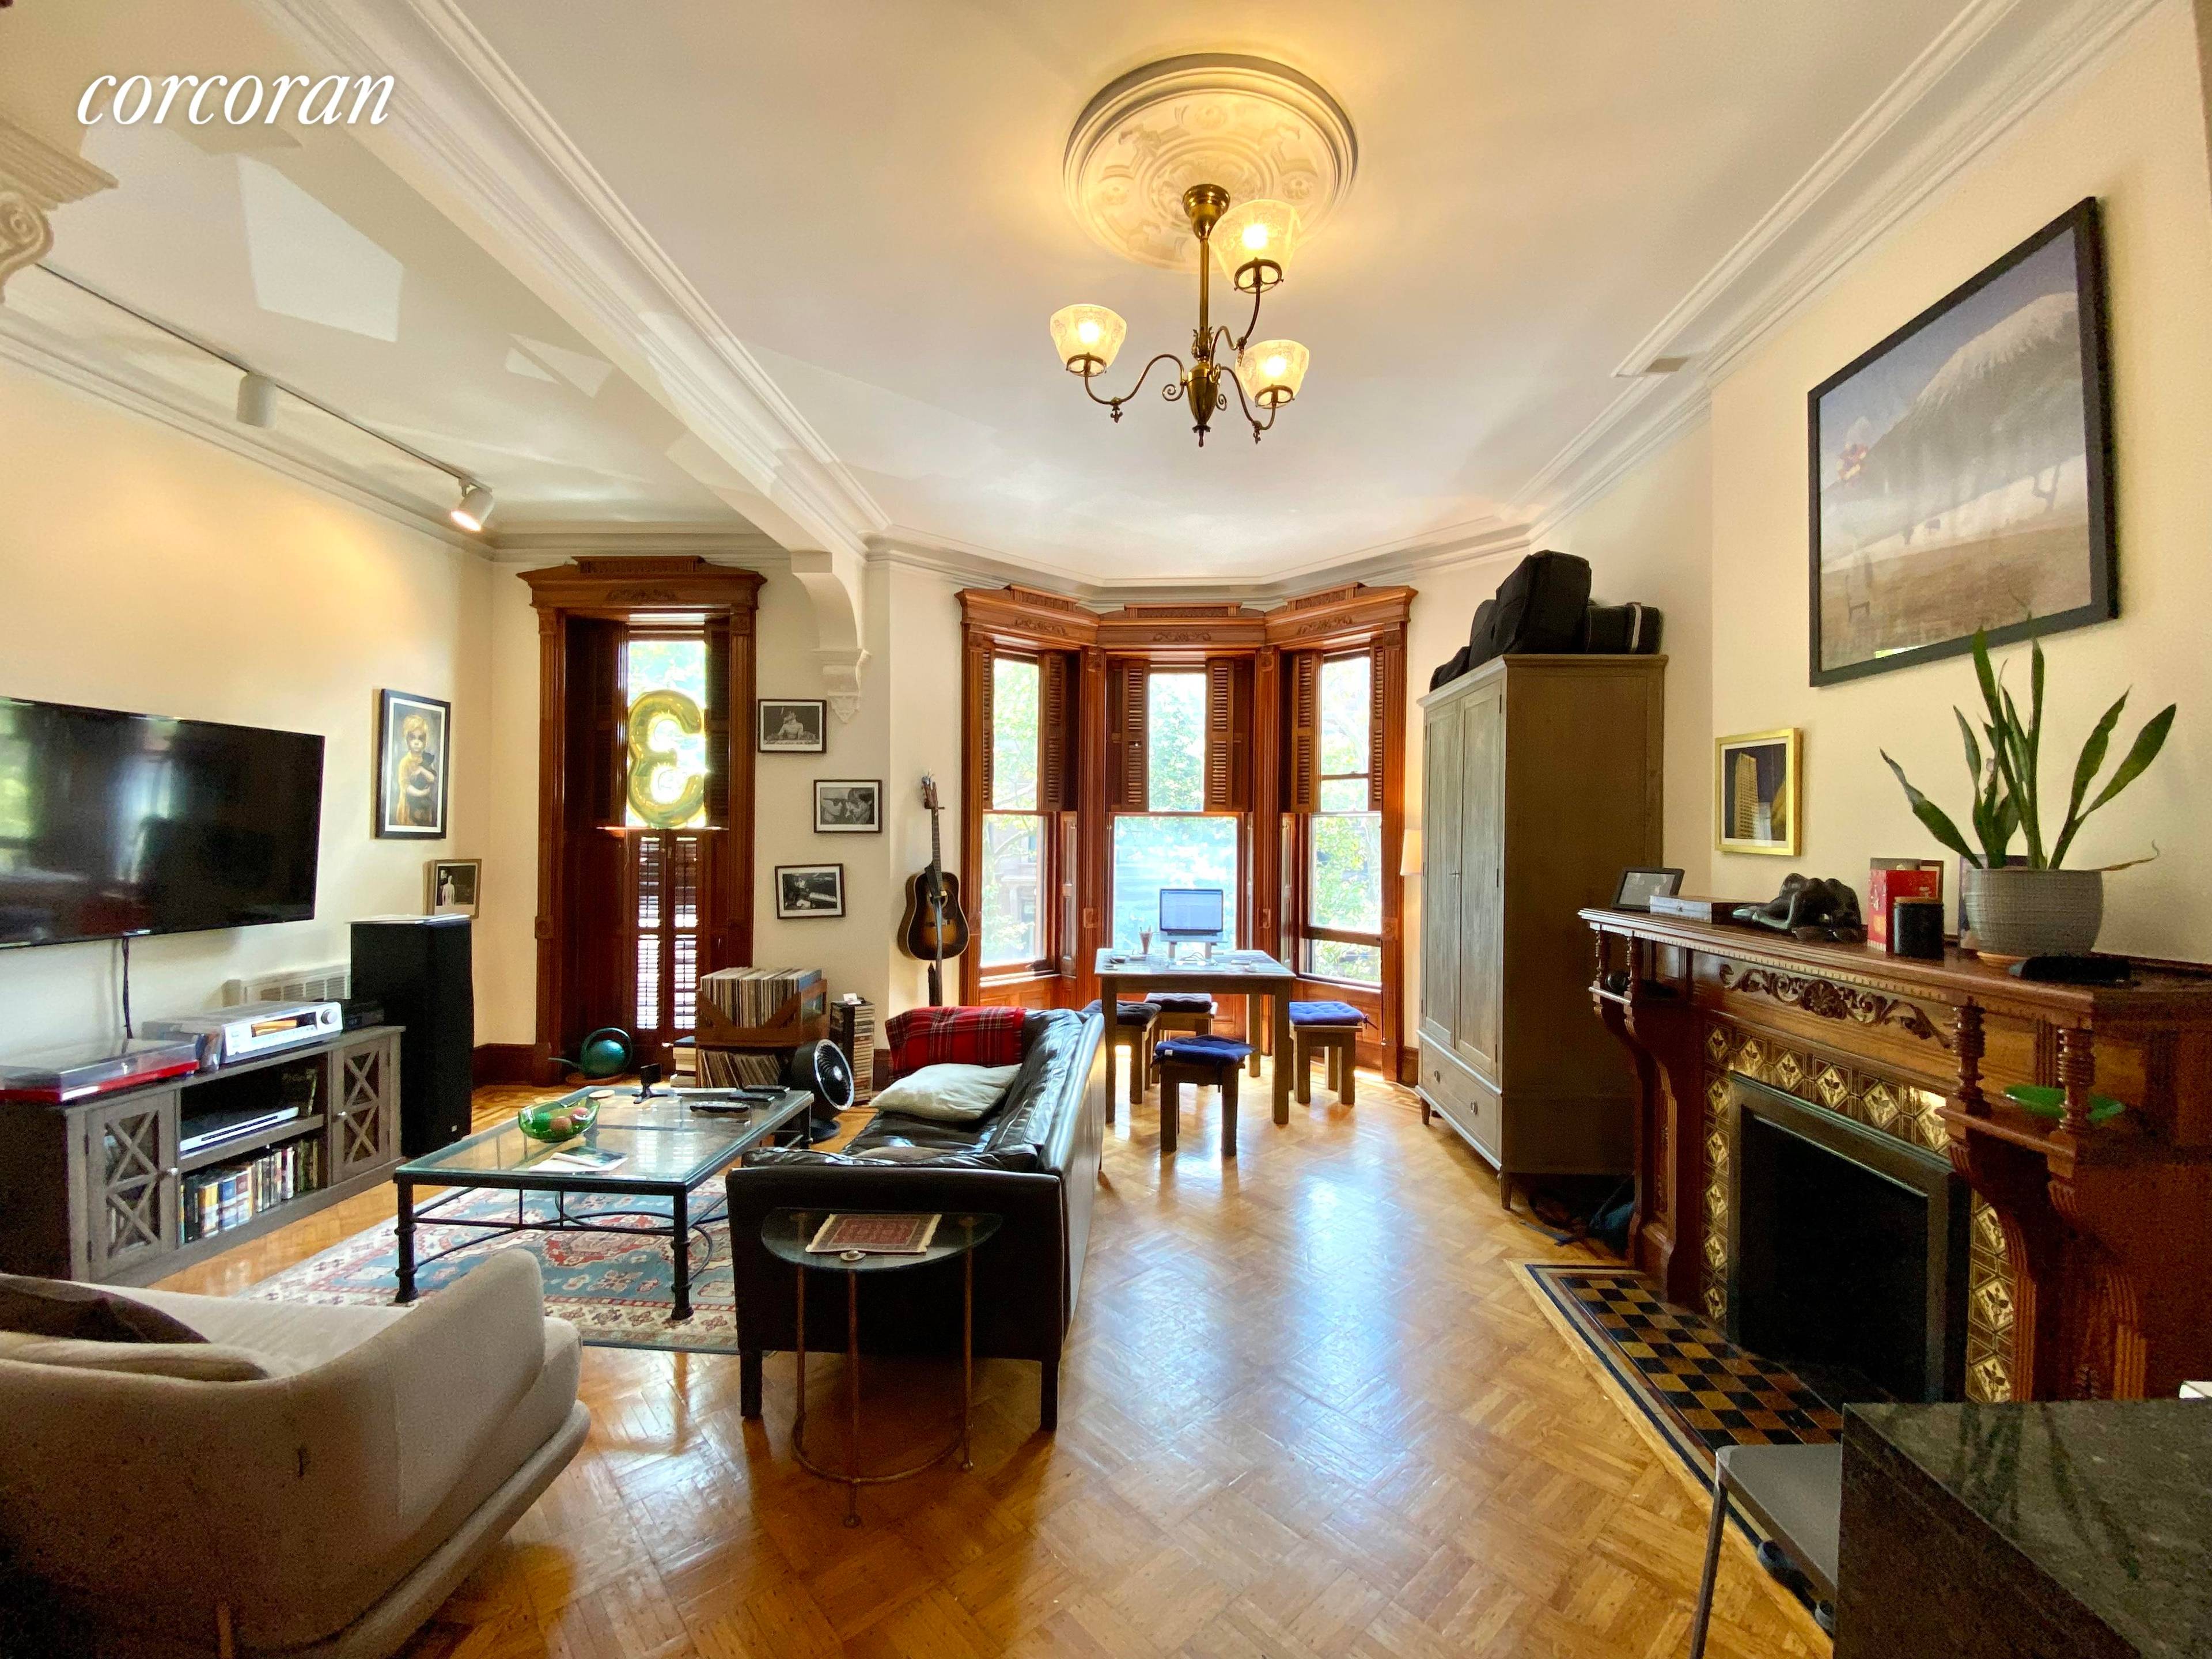 1000 sqft and the most beautiful apartment in a beautiful brownstone on a beautiful block !